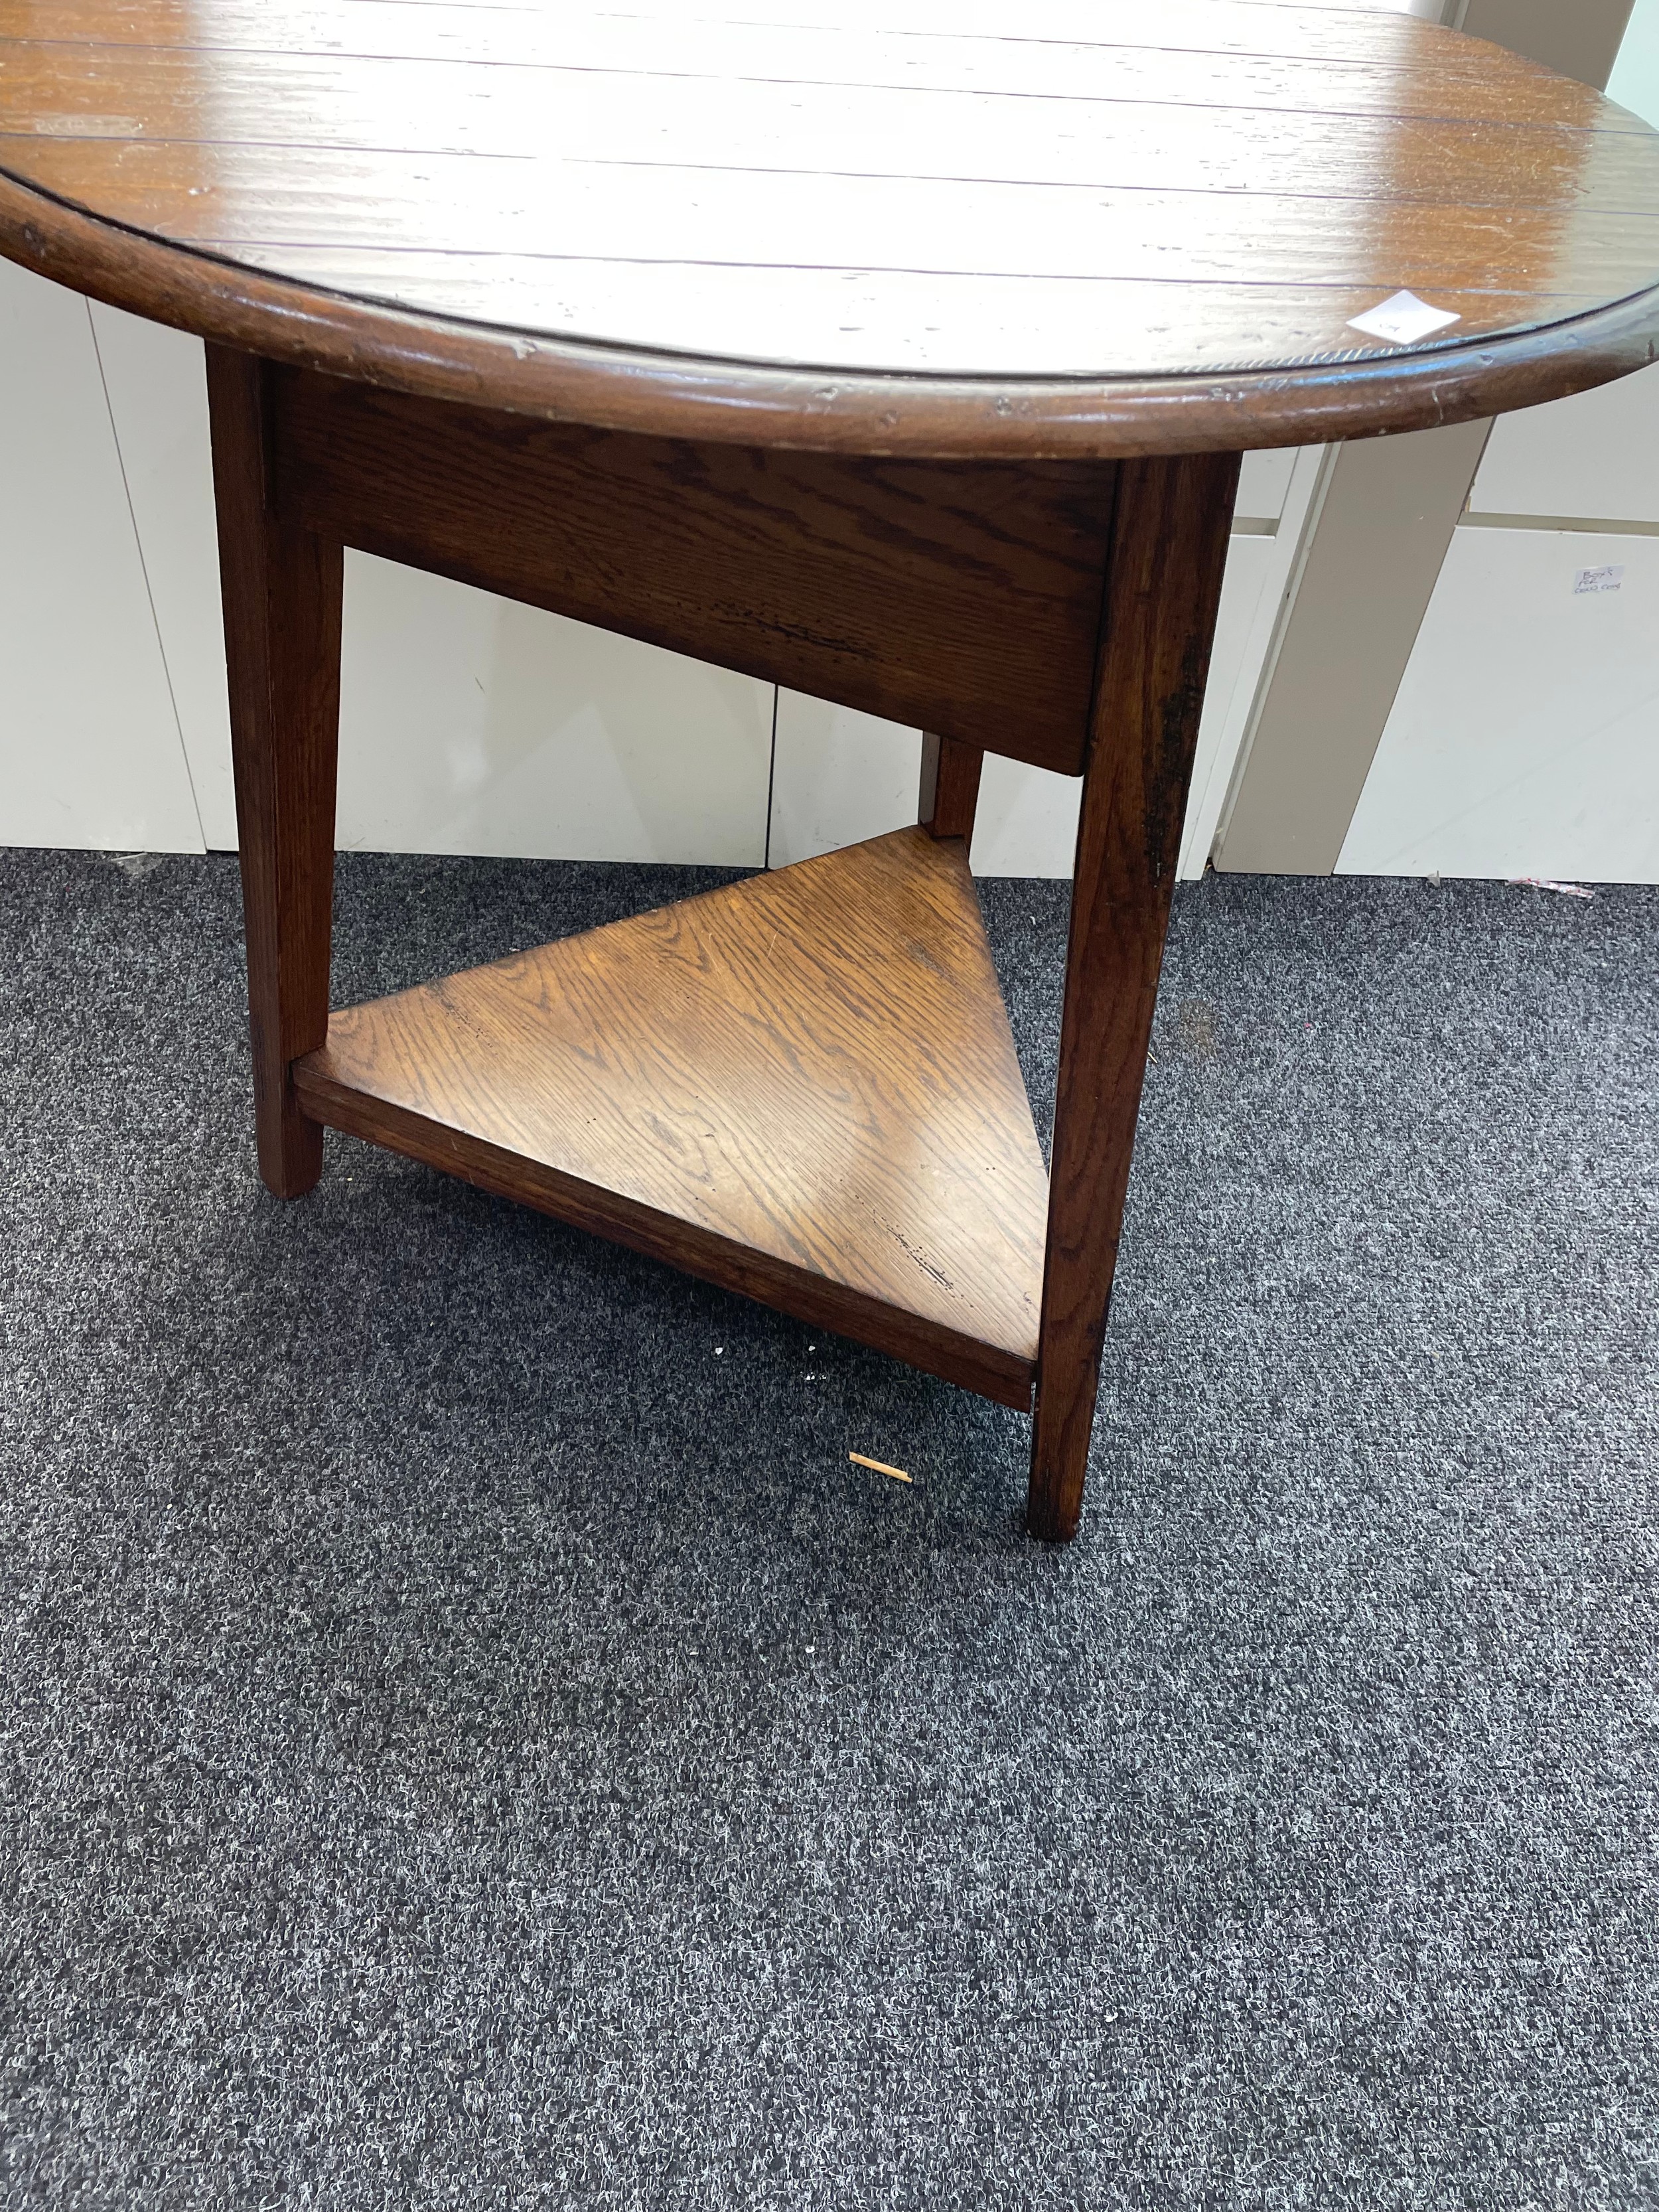 Round oak table - Image 2 of 4